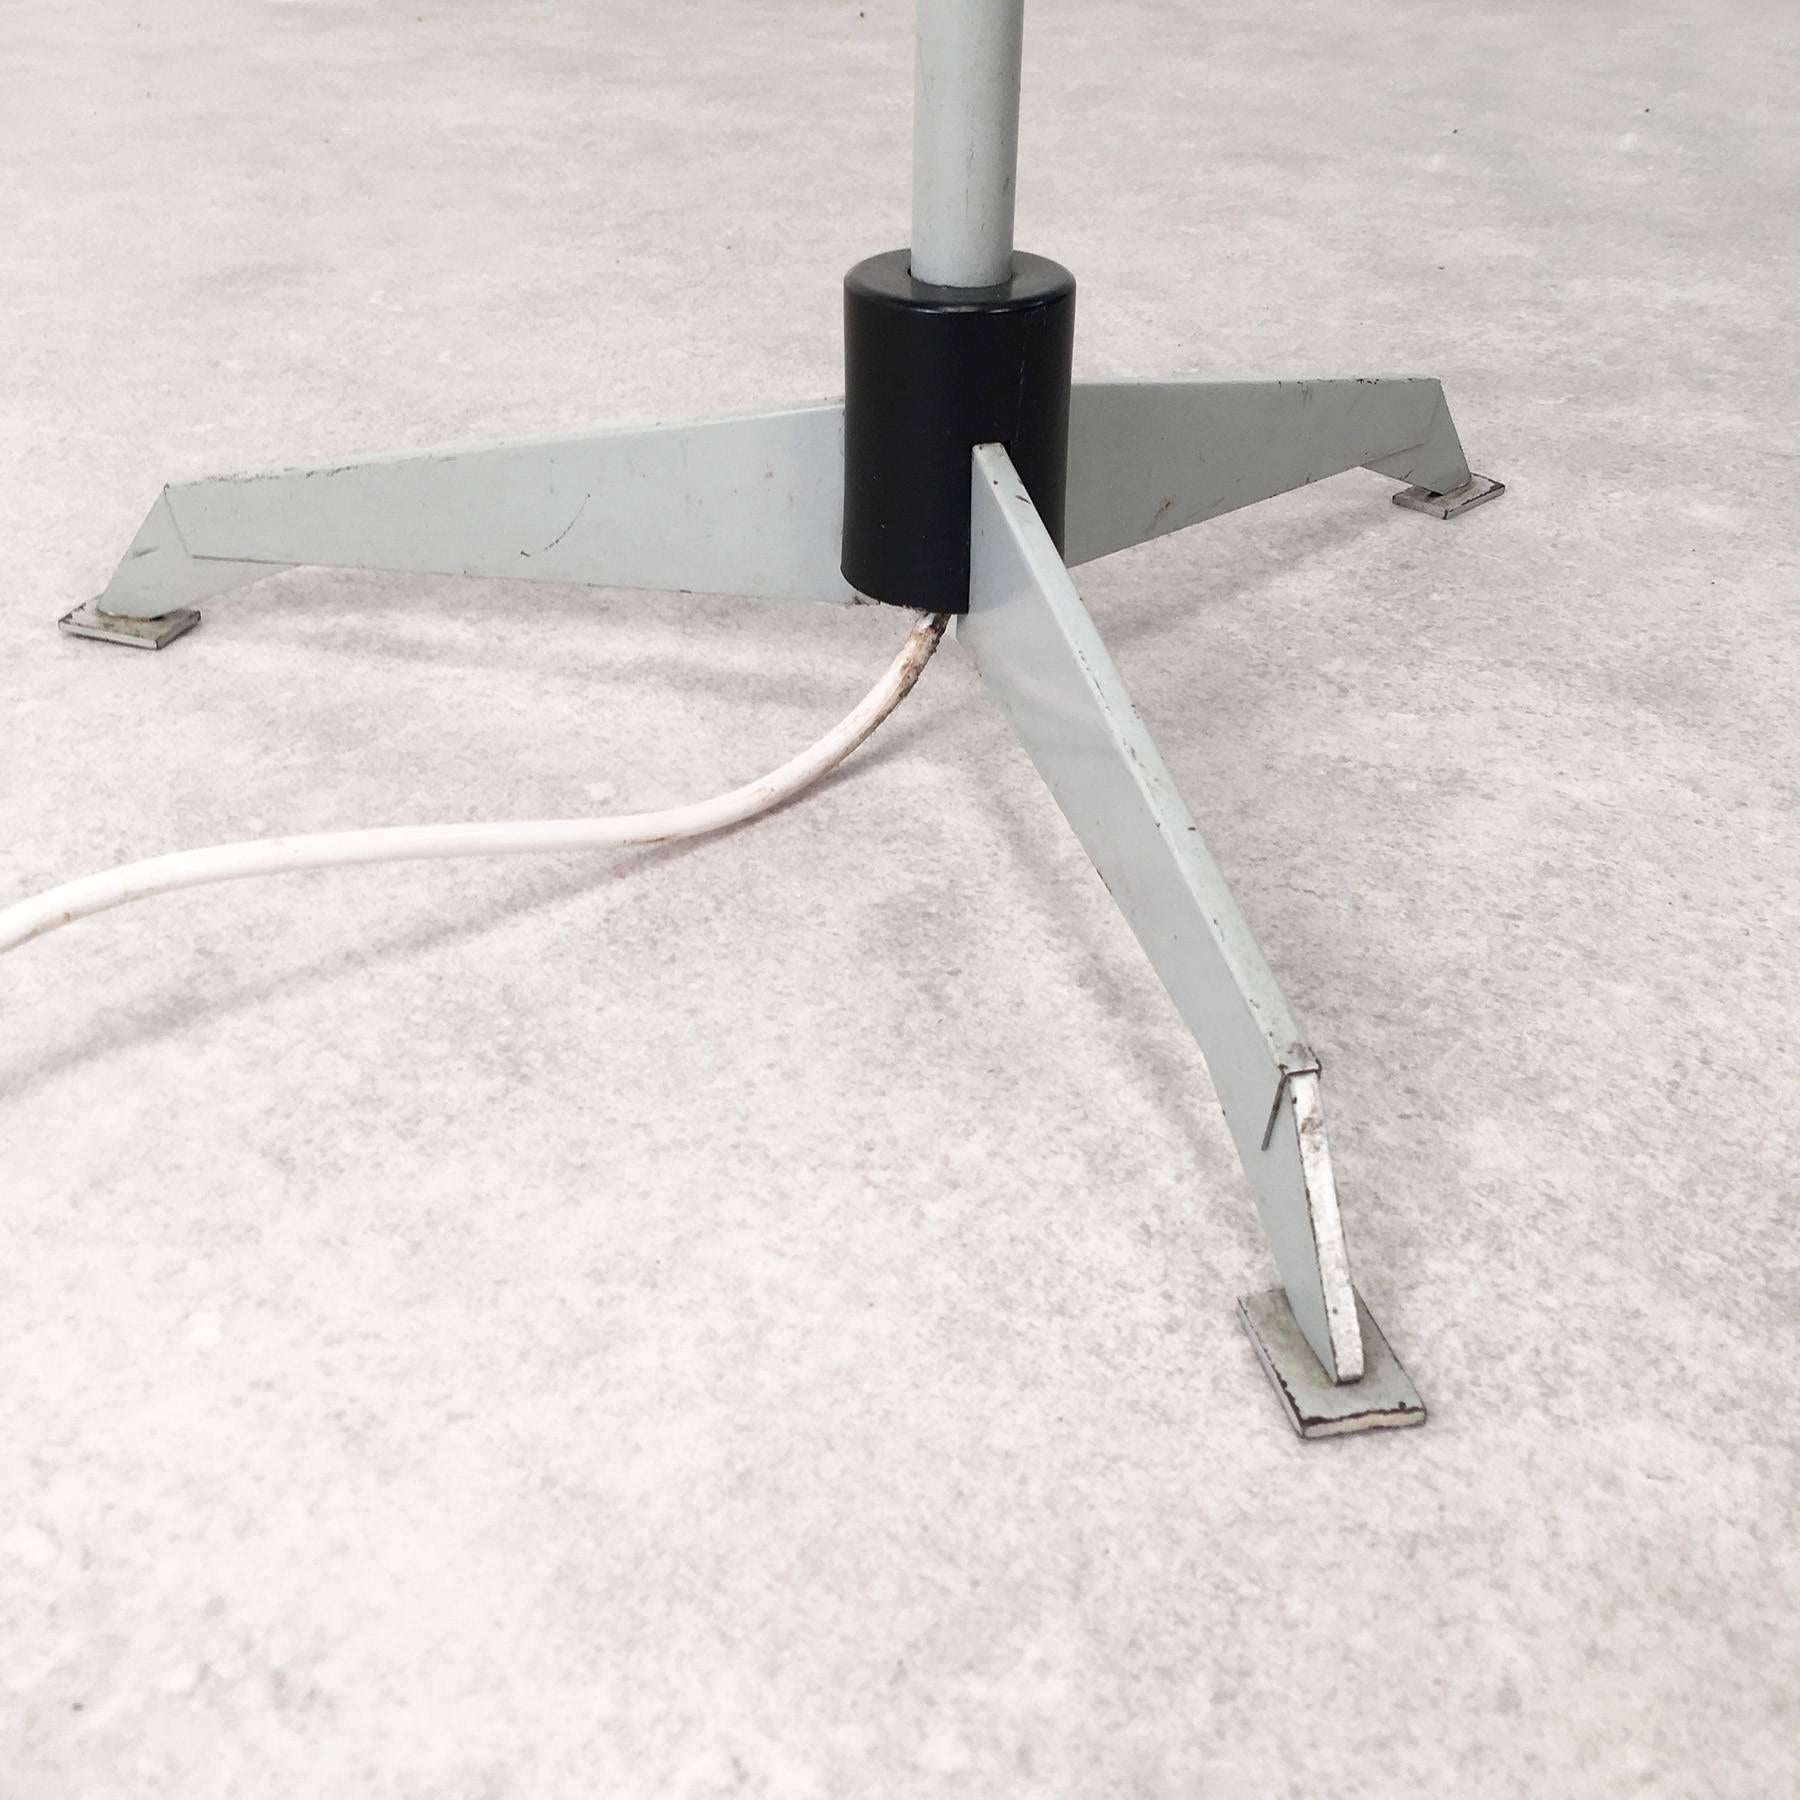 Mid-20th Century Dutch Industrial Design Floor Lamp by Niek Hiemstra for Evolux For Sale